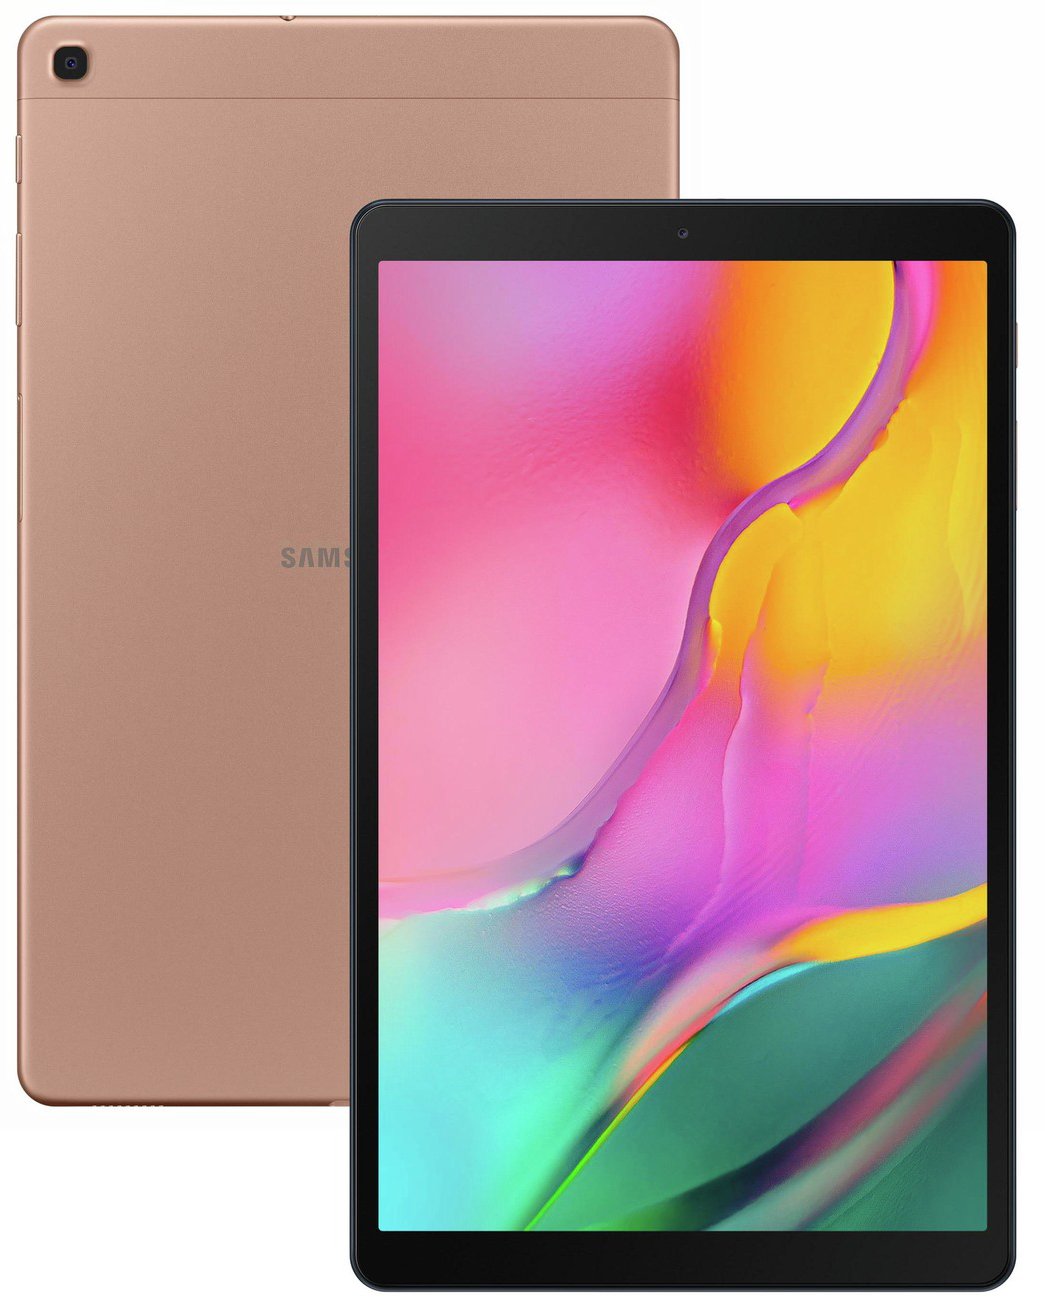 Samsung Tab A 2019 10.1 Inch 32GB Wi-Fi Tablet Review